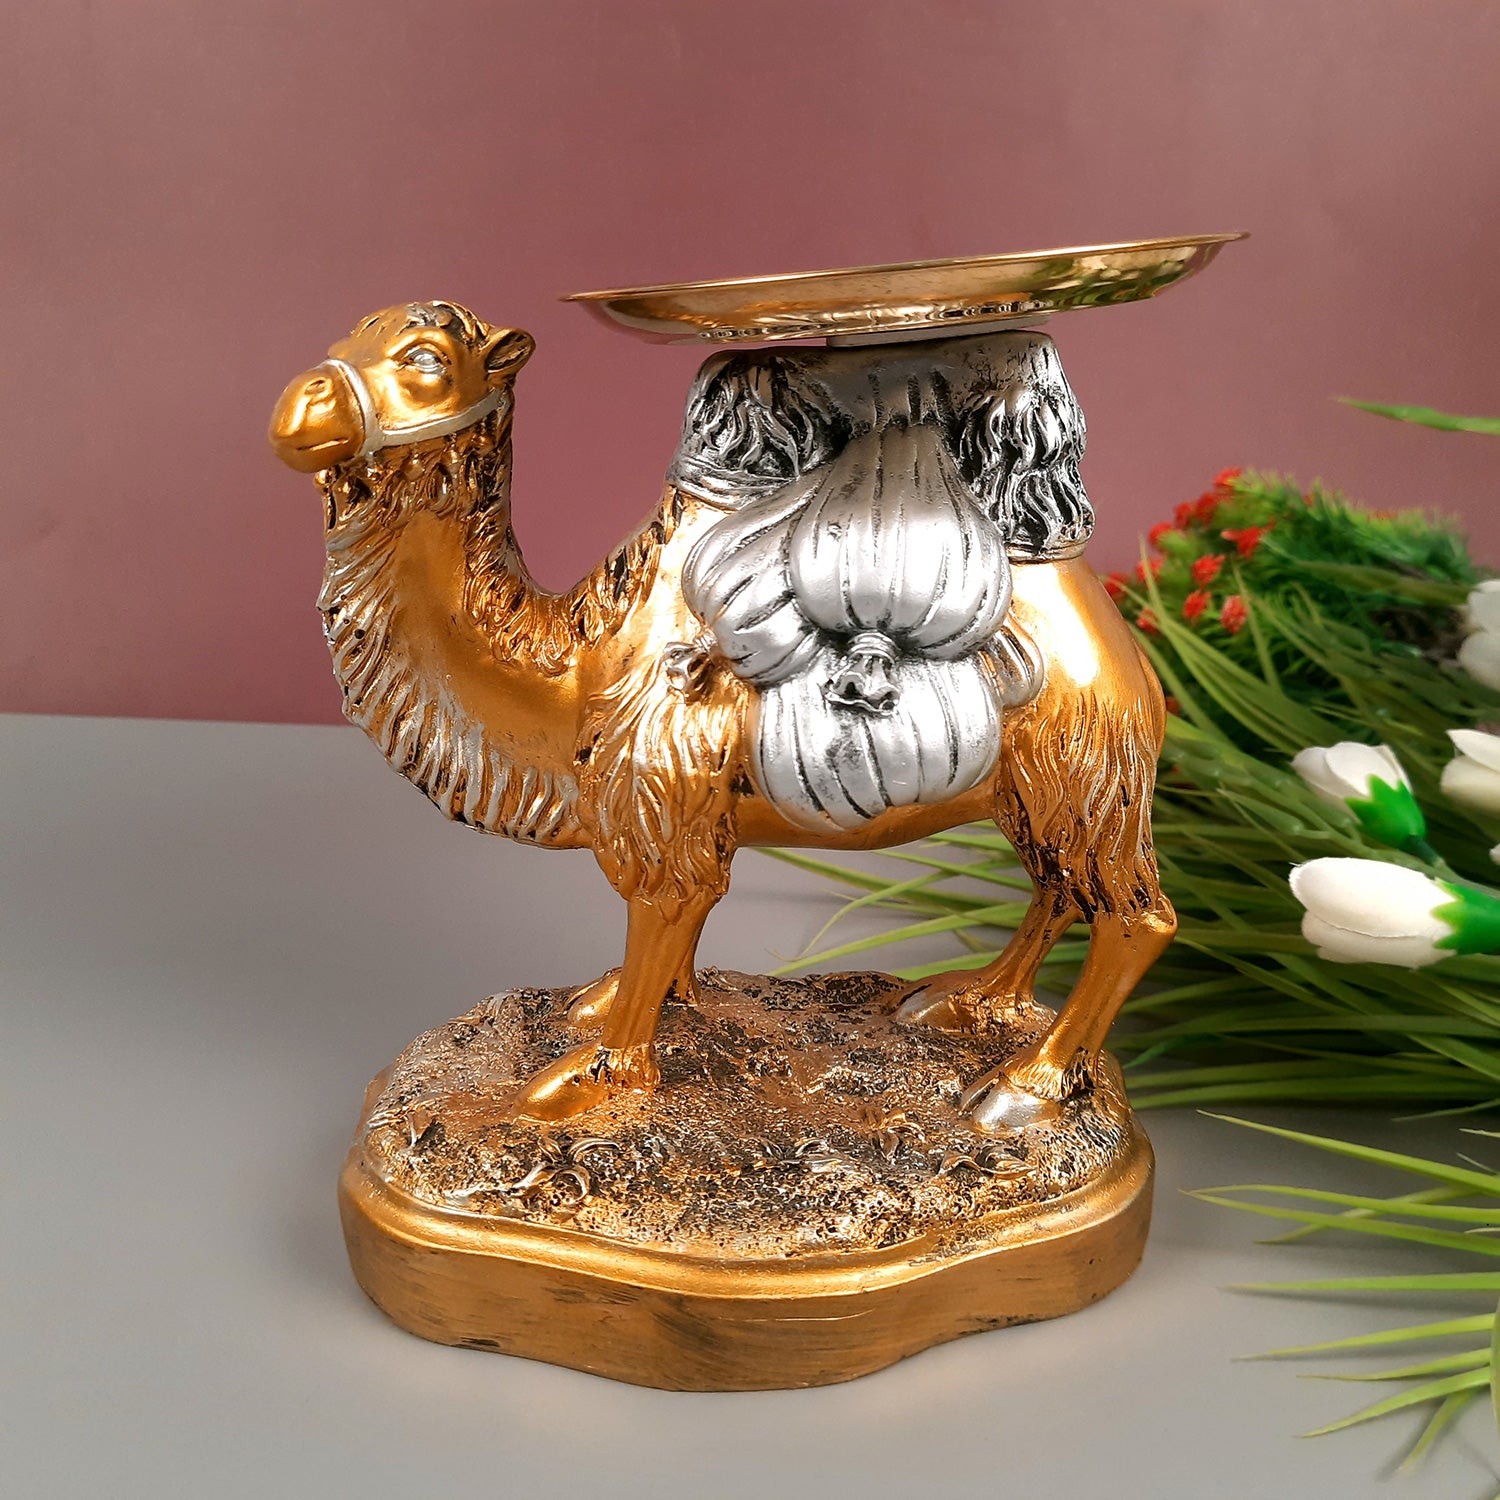 Camel Showpiece With Detachable Tray | Camel Statue | Decorative Items - for Home, Table, Living Room, Corner Decor & Gifts - 8 Inch - Apkamart #Color_Brown